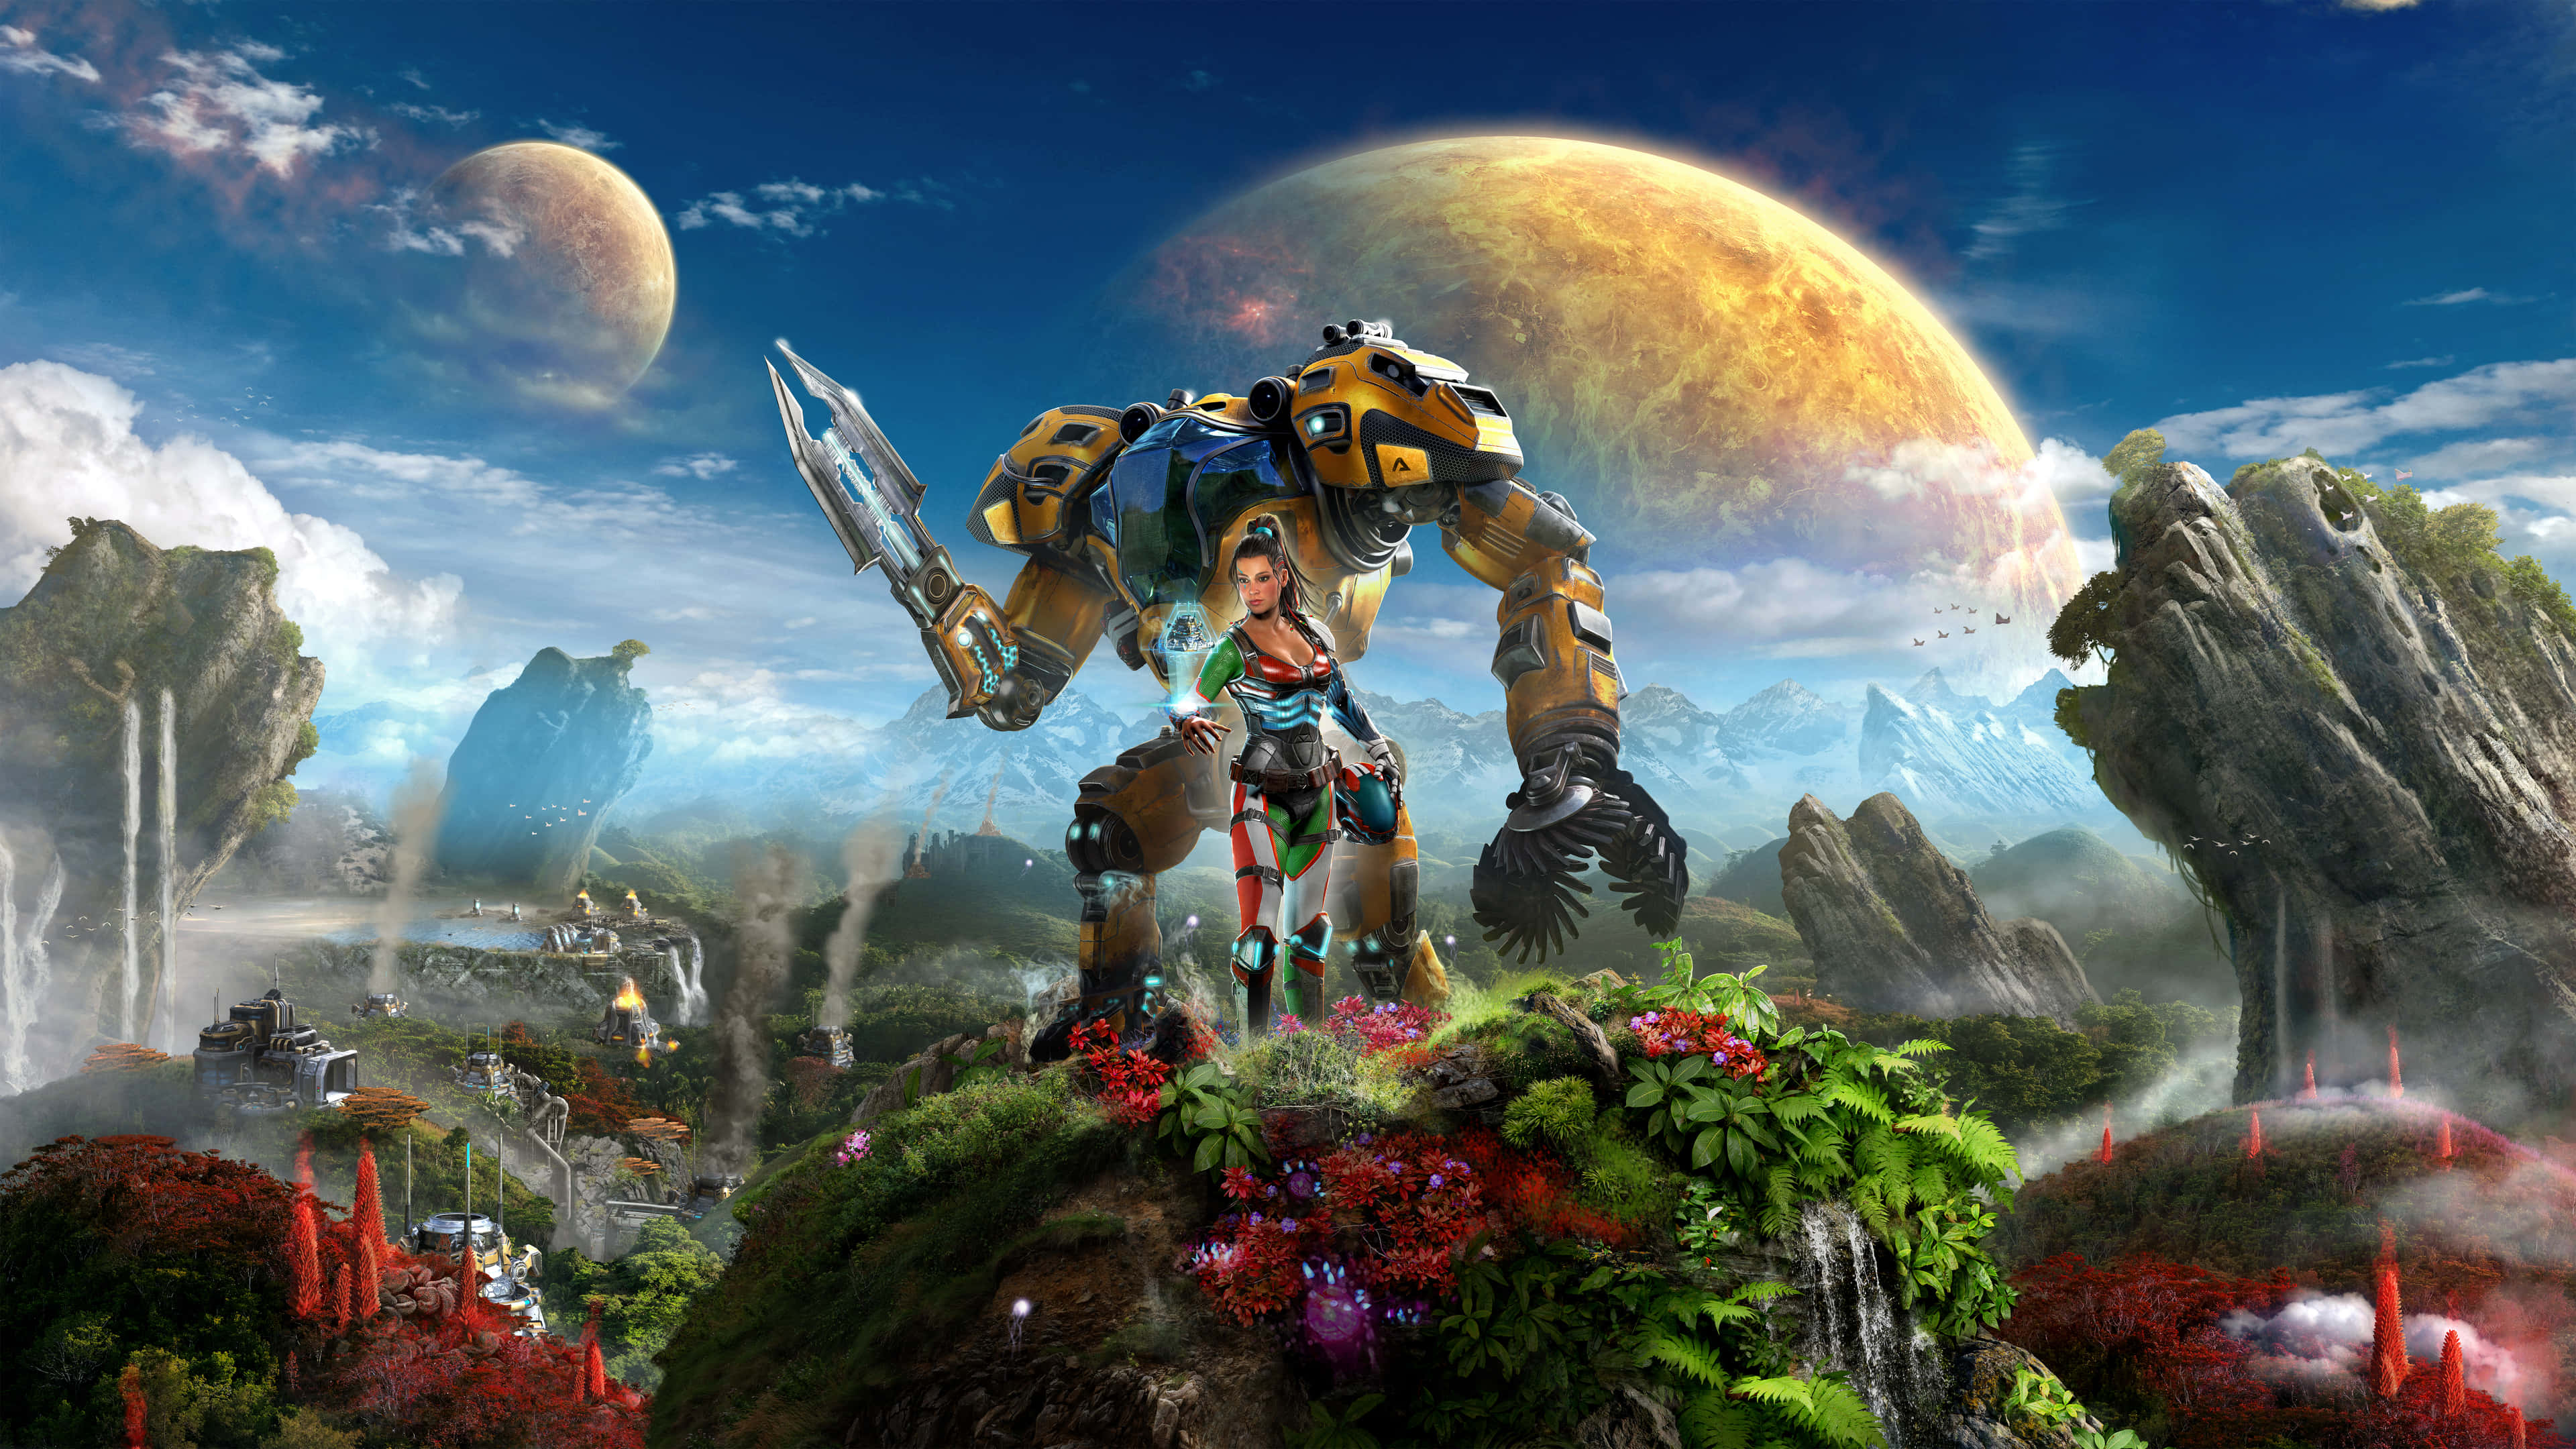 A Woman Is Standing On A Mountain With A Robot In The Background Wallpaper